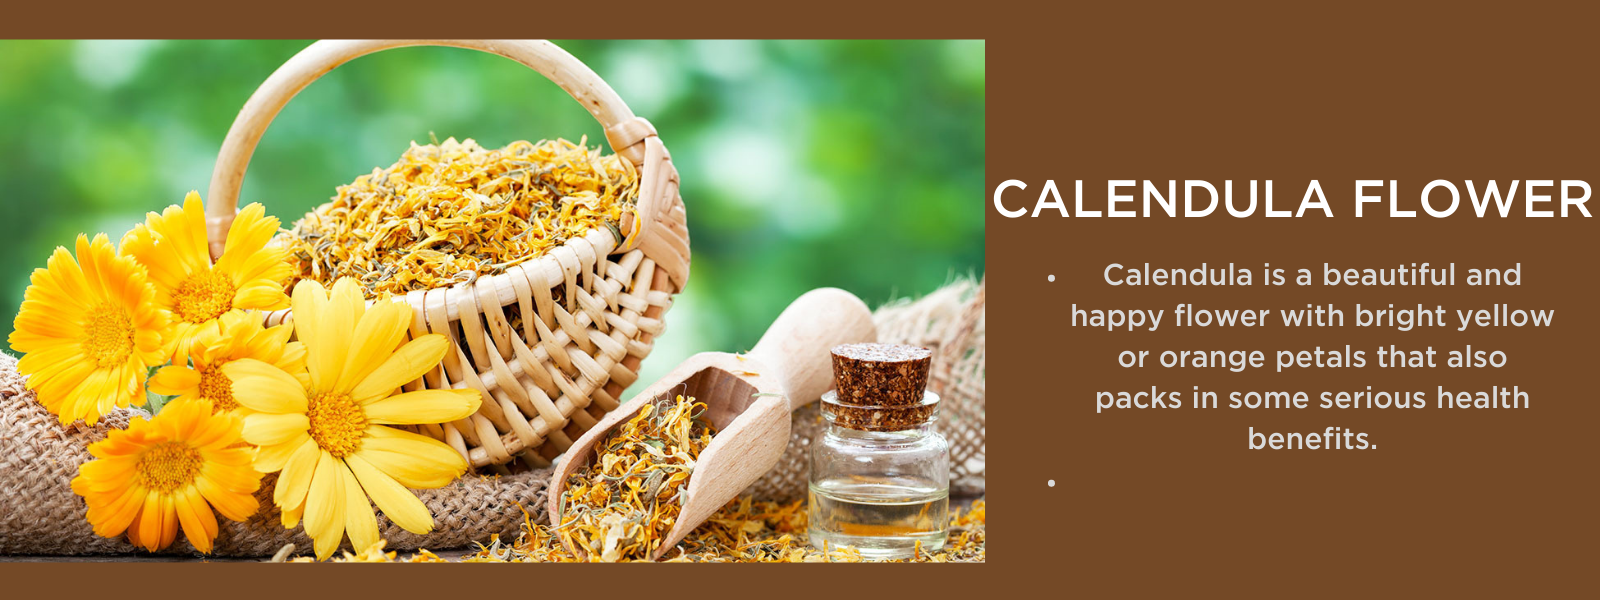 Calendula flower- Health Benefits, Uses and Important Facts